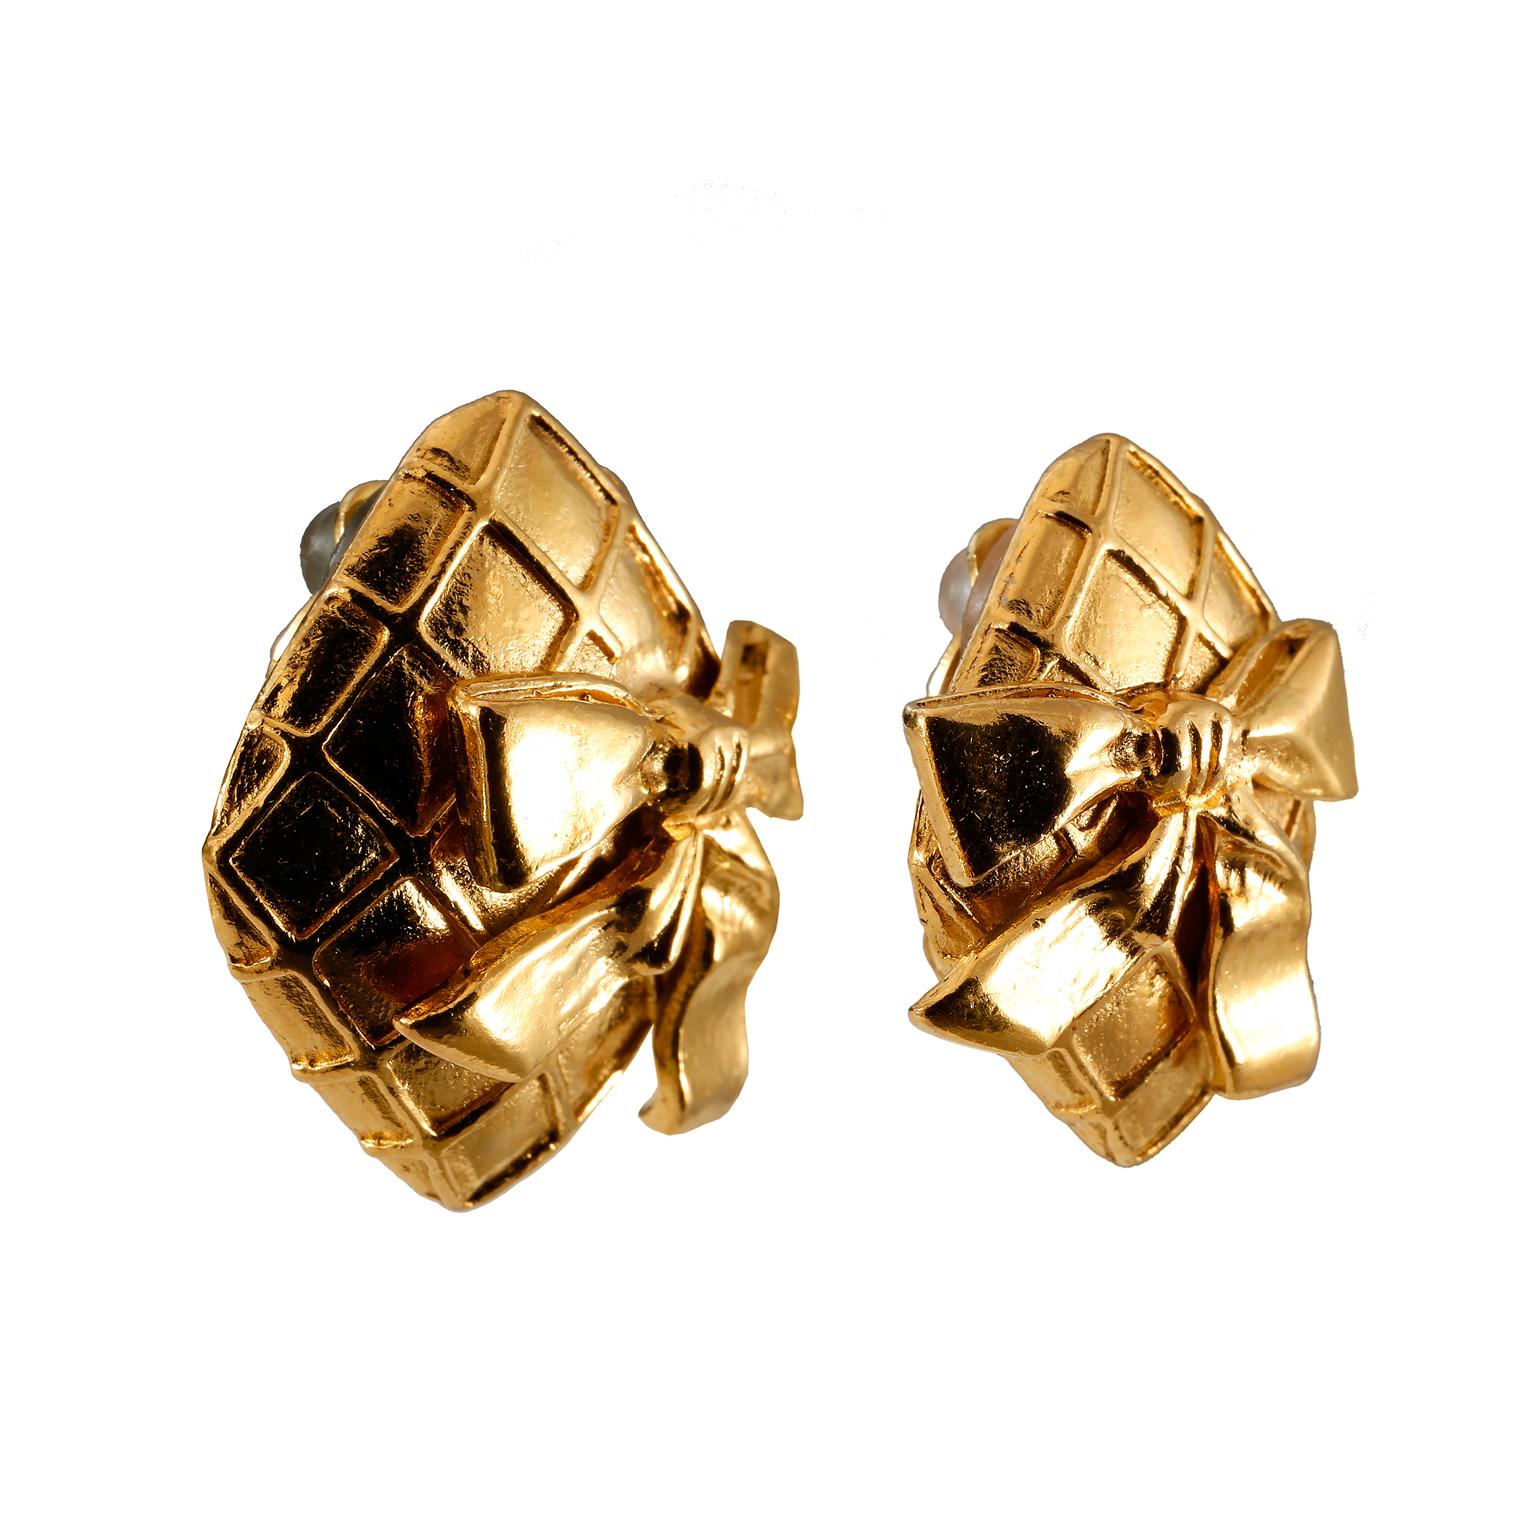 These authentic Chanel Gold  Quilted Square Bow Earrings are in very good vintage condition from the 1970’s.  Gold tone quilted squares with lavish bows have clip on closure.   Made in France.

